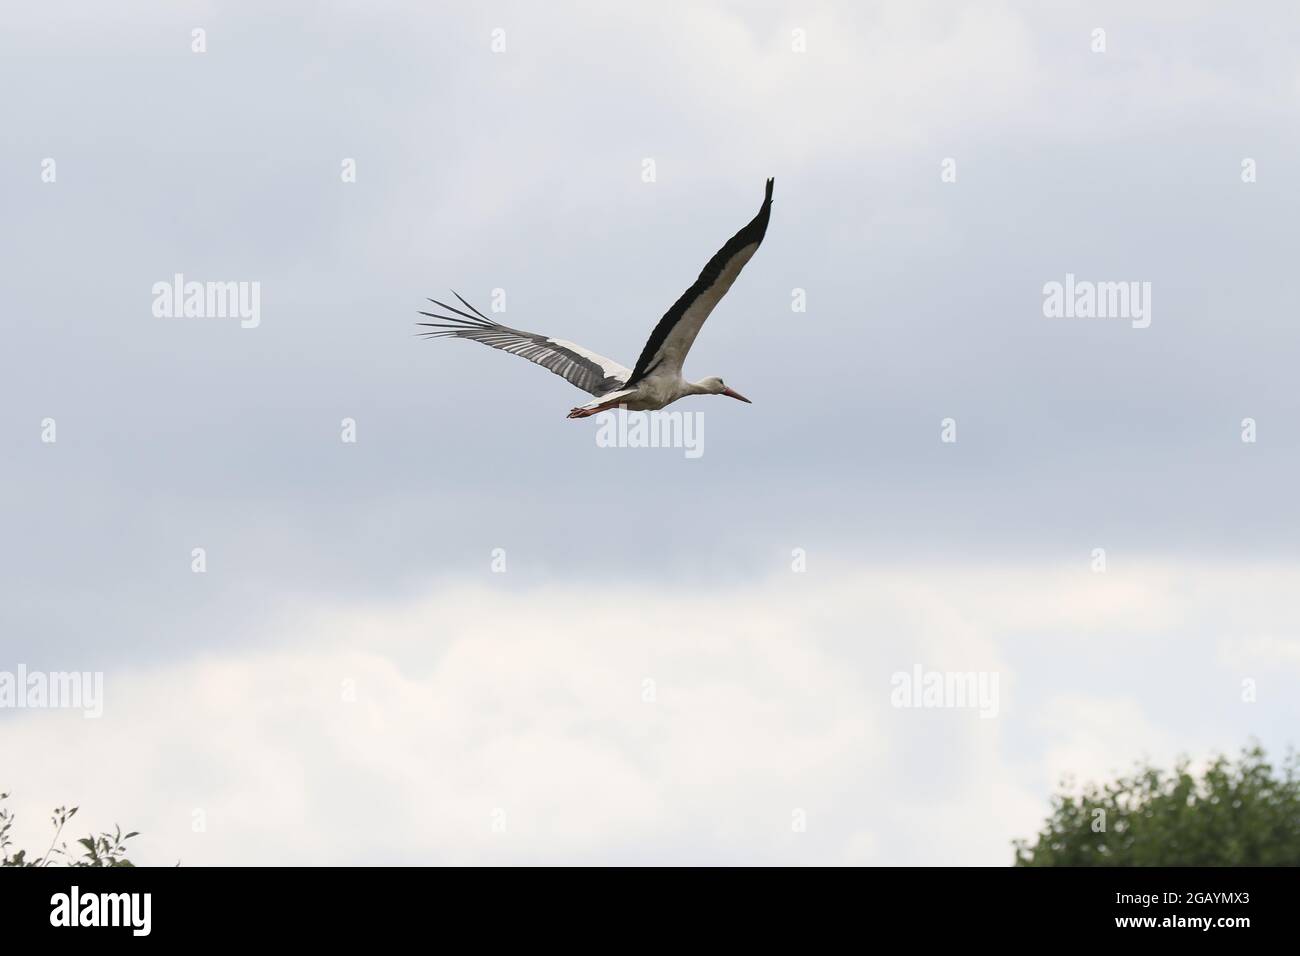 08/01/2021, Germany, Brandenburg, Ihlow ( Oberbarnim). The white stork taking off to search for food for the young storks Stock Photo